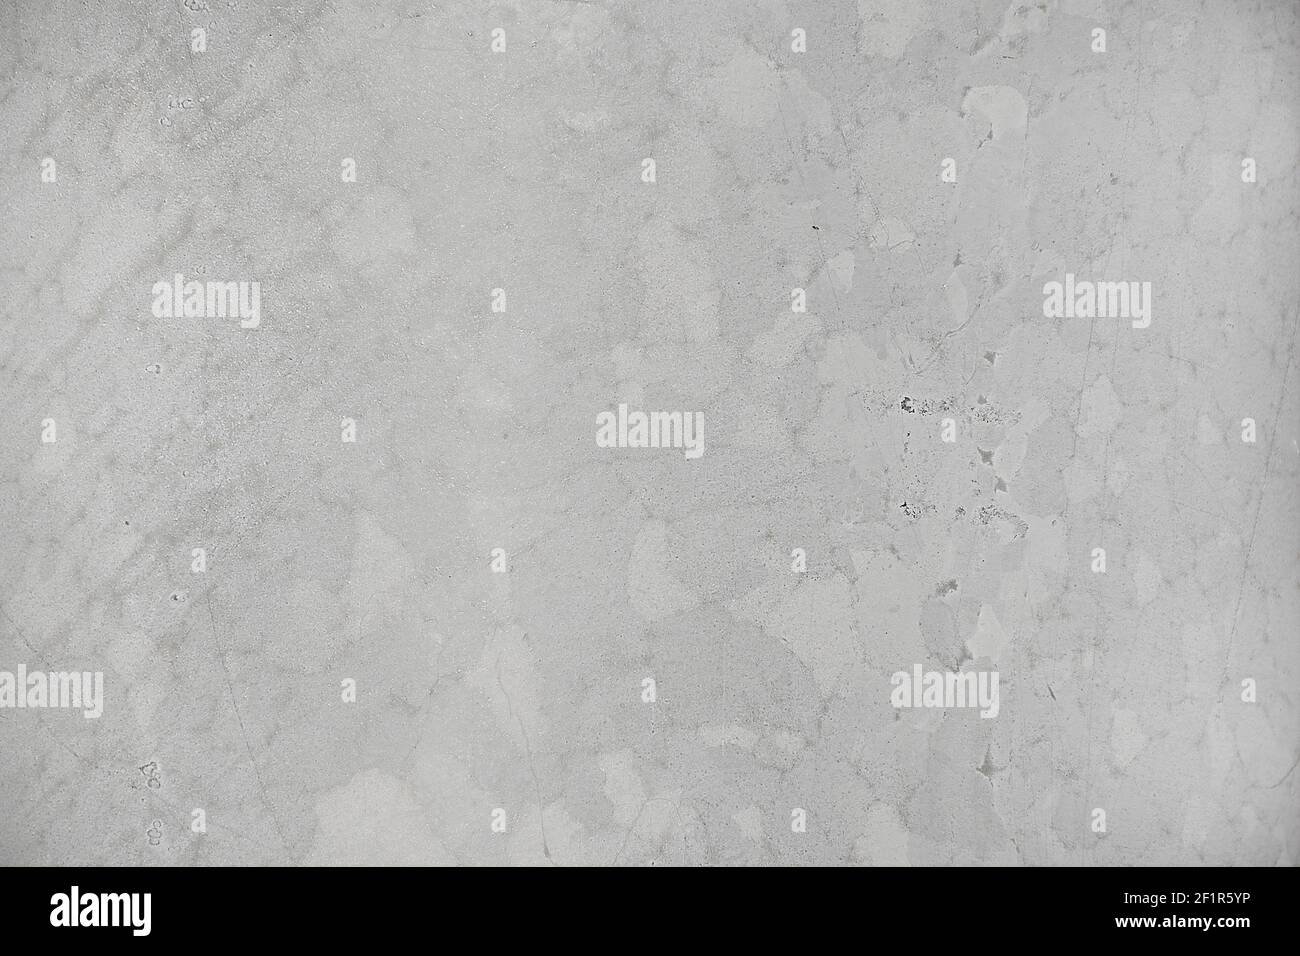 close up of gray speckled textured background pattern Stock Photo